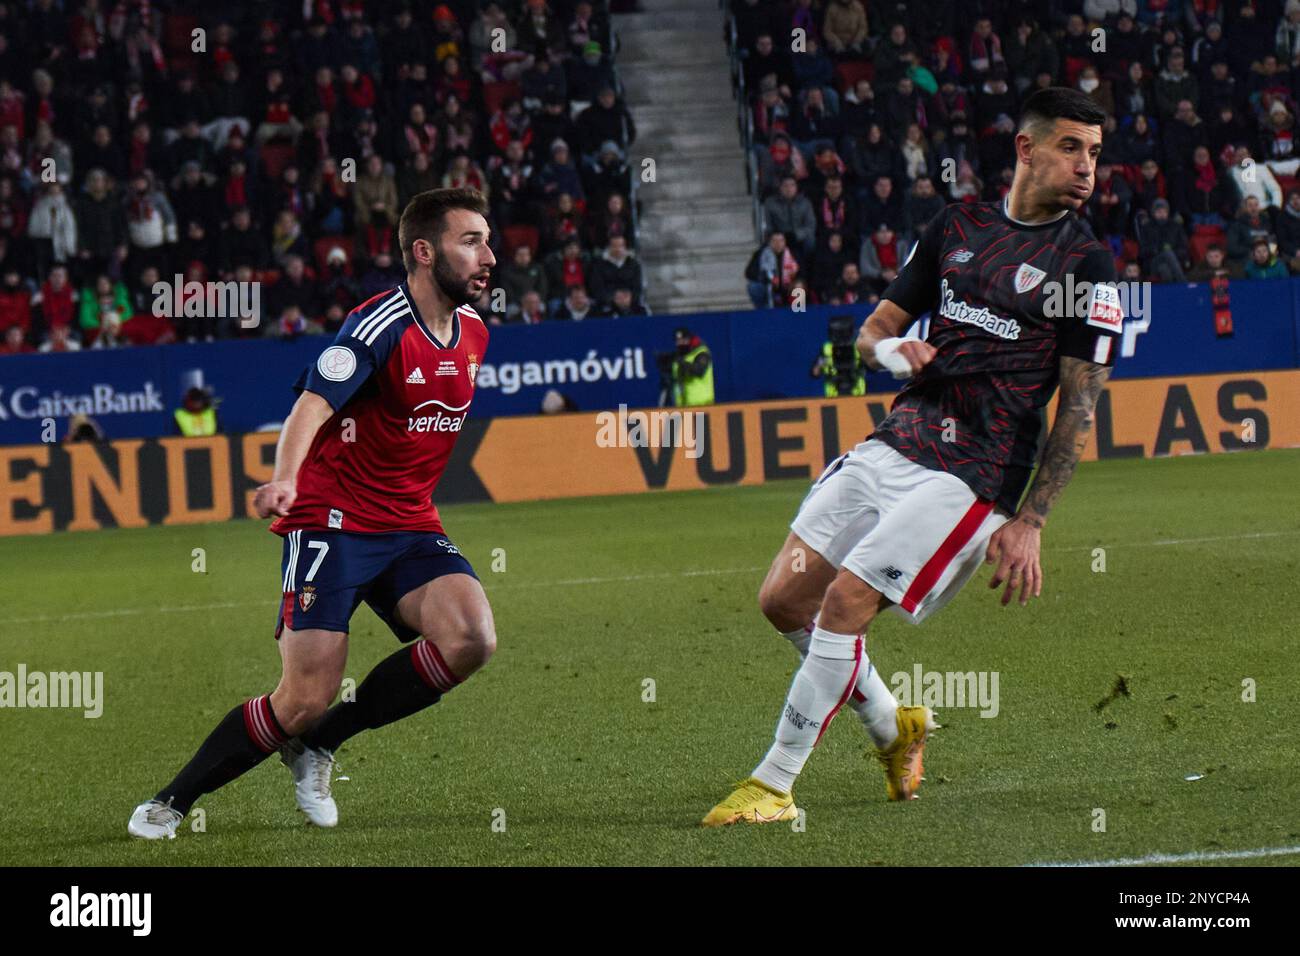 Pamplona, Spain. 1st Mar. 2023. Sports. Football/Soccer. Moncayola (7. CA Osasuna) and Yuri Berchiche (17. Athletic Club) during the first leg football match of the semifinal of the Copa del Rey between CA Osasuna and Athletic Club played at El Sadar stadium in Pamplona (Spain) on March 1, 2023. Credit: Iñigo Alzugaray/Alamy Live News Stock Photo